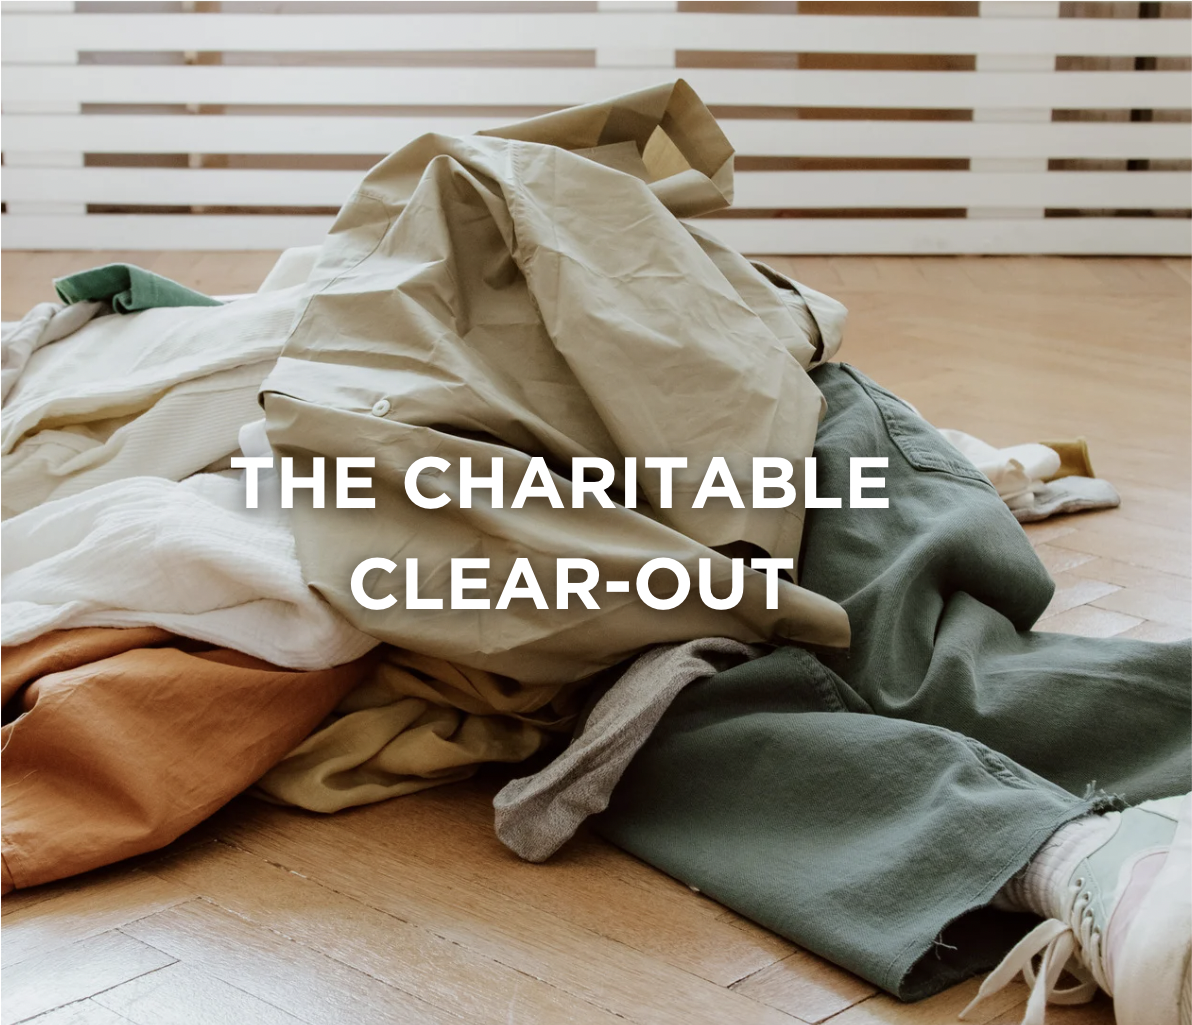 DONATION COLLECTION  HK$300  Got a pile of unwanted clothes you don't know what to do with? Use our hassle-free collection service directly from your home. Just let us know your preferred collection time and we will organize the rest.   All donations will go to our partner charity Redress.  The best bit? Receive $200 from us to use on Style Carousel!